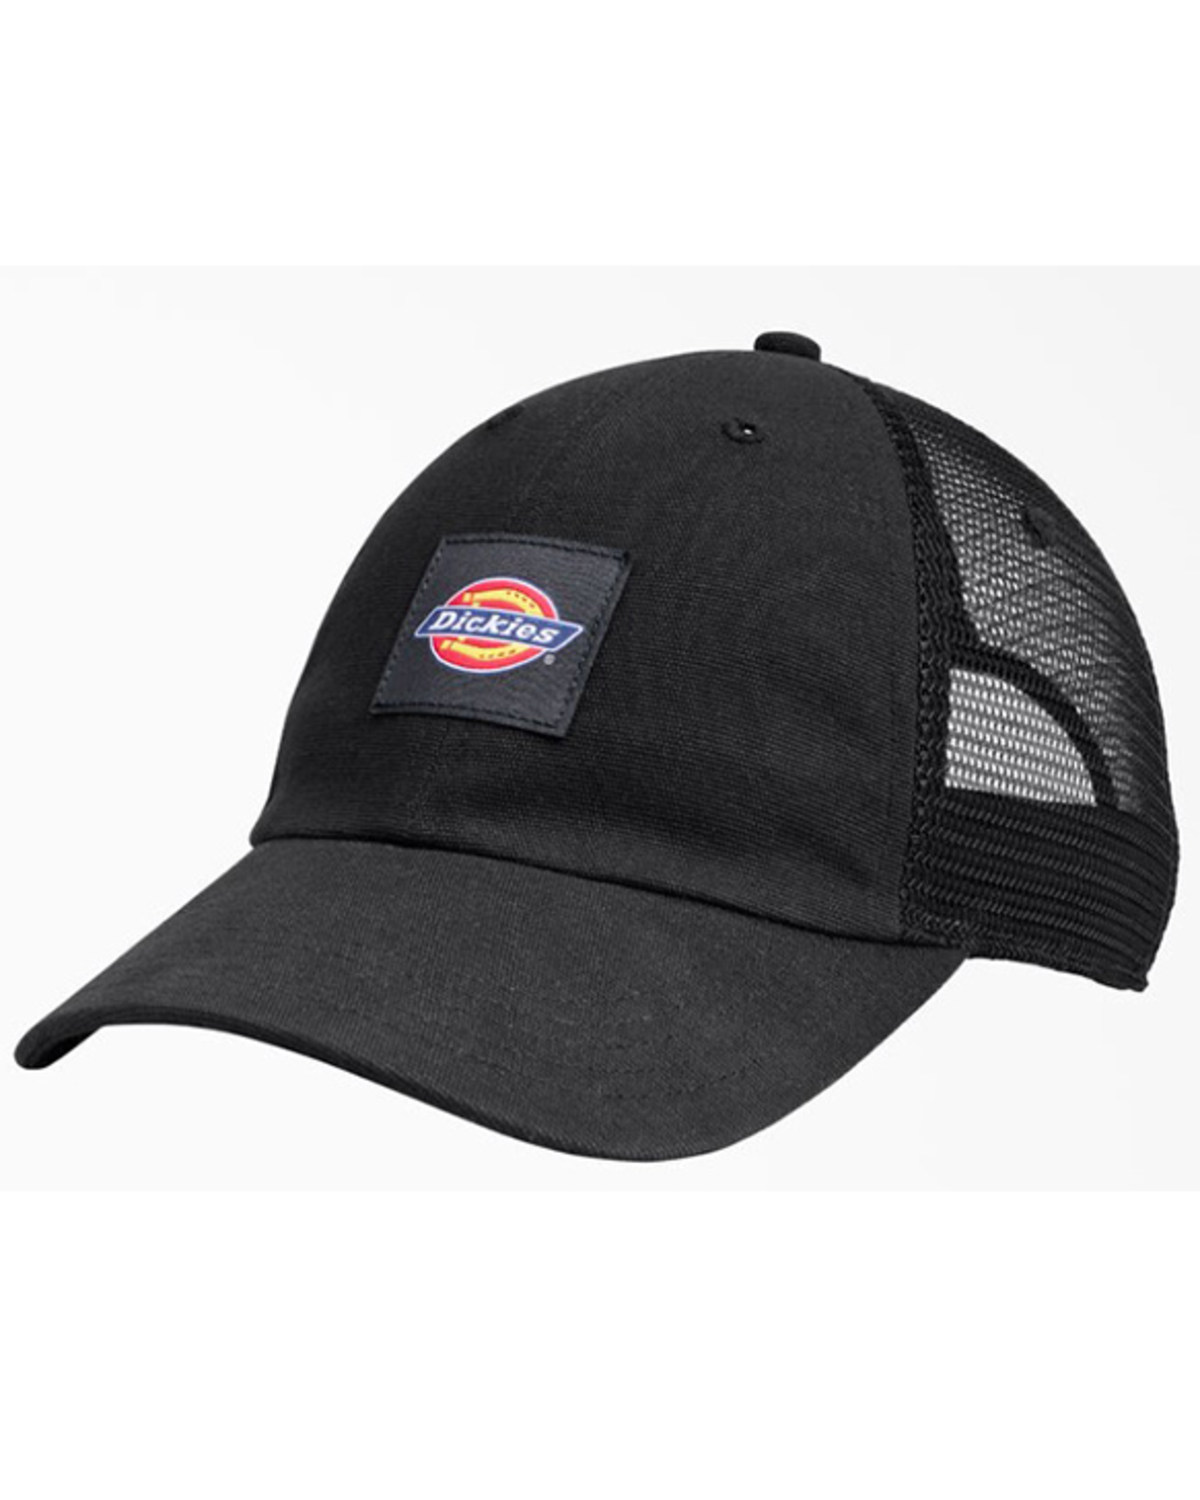 Dickies Men's Washed Canvas Baseball Hat